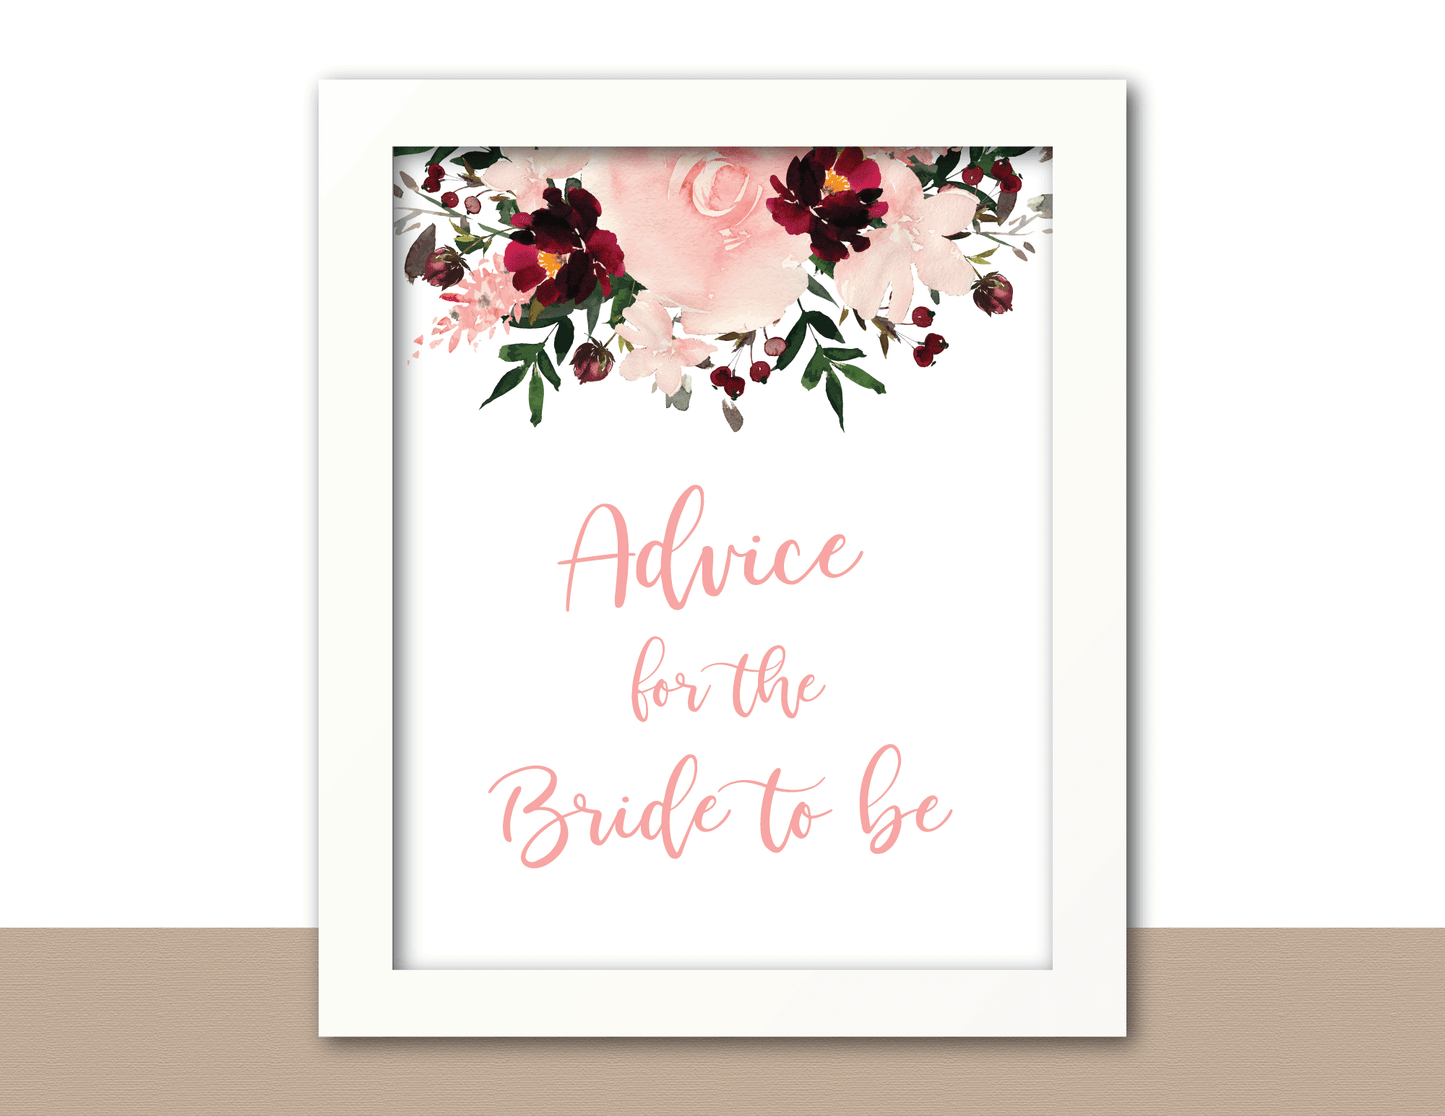 advice for the bride to be sign - printable bridal shower decor - Celebrating Together